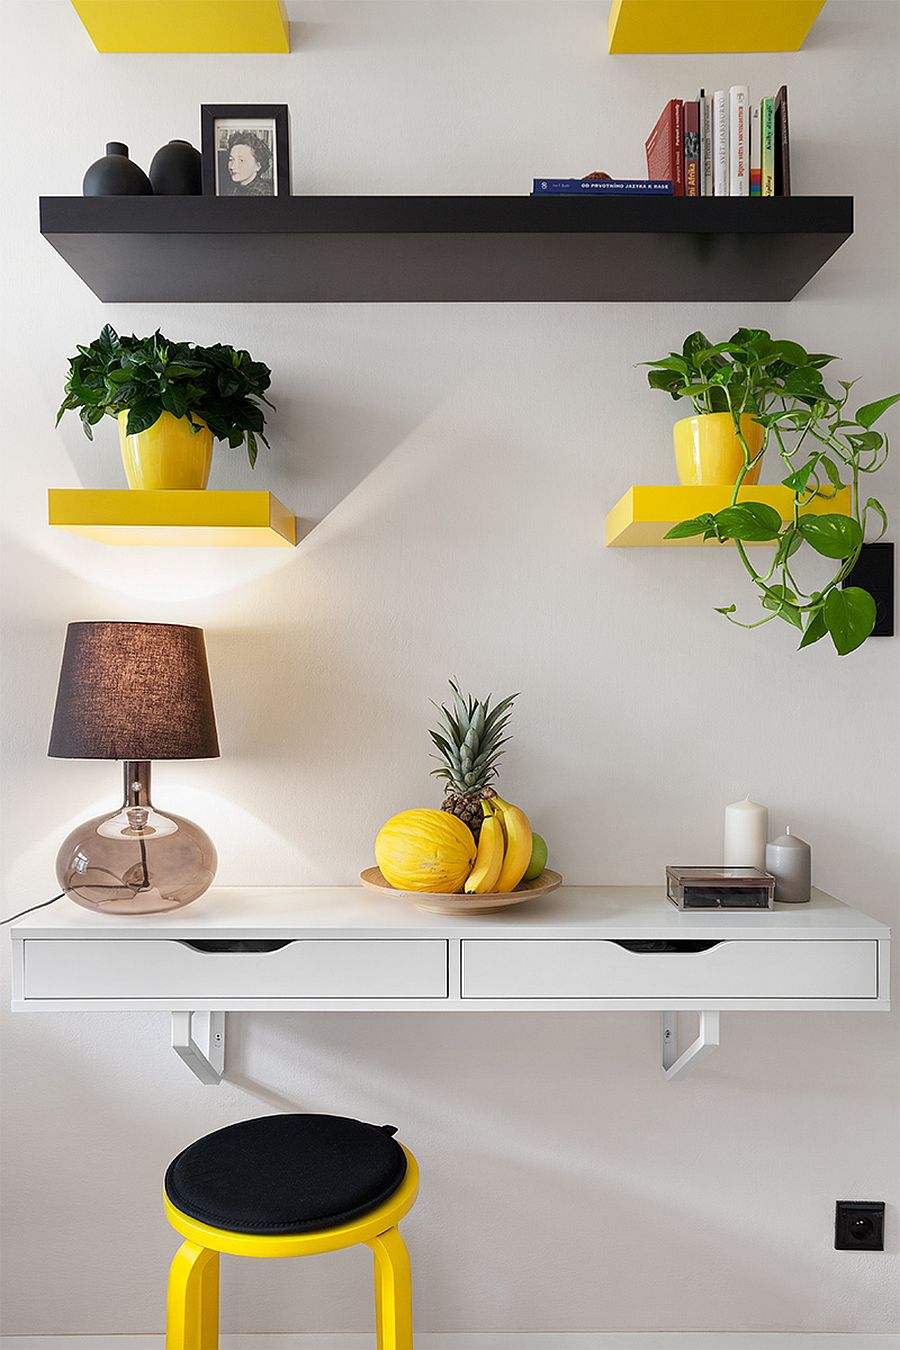 Yellow and black floating shelves act as plant holders inside this budget friendly apartment